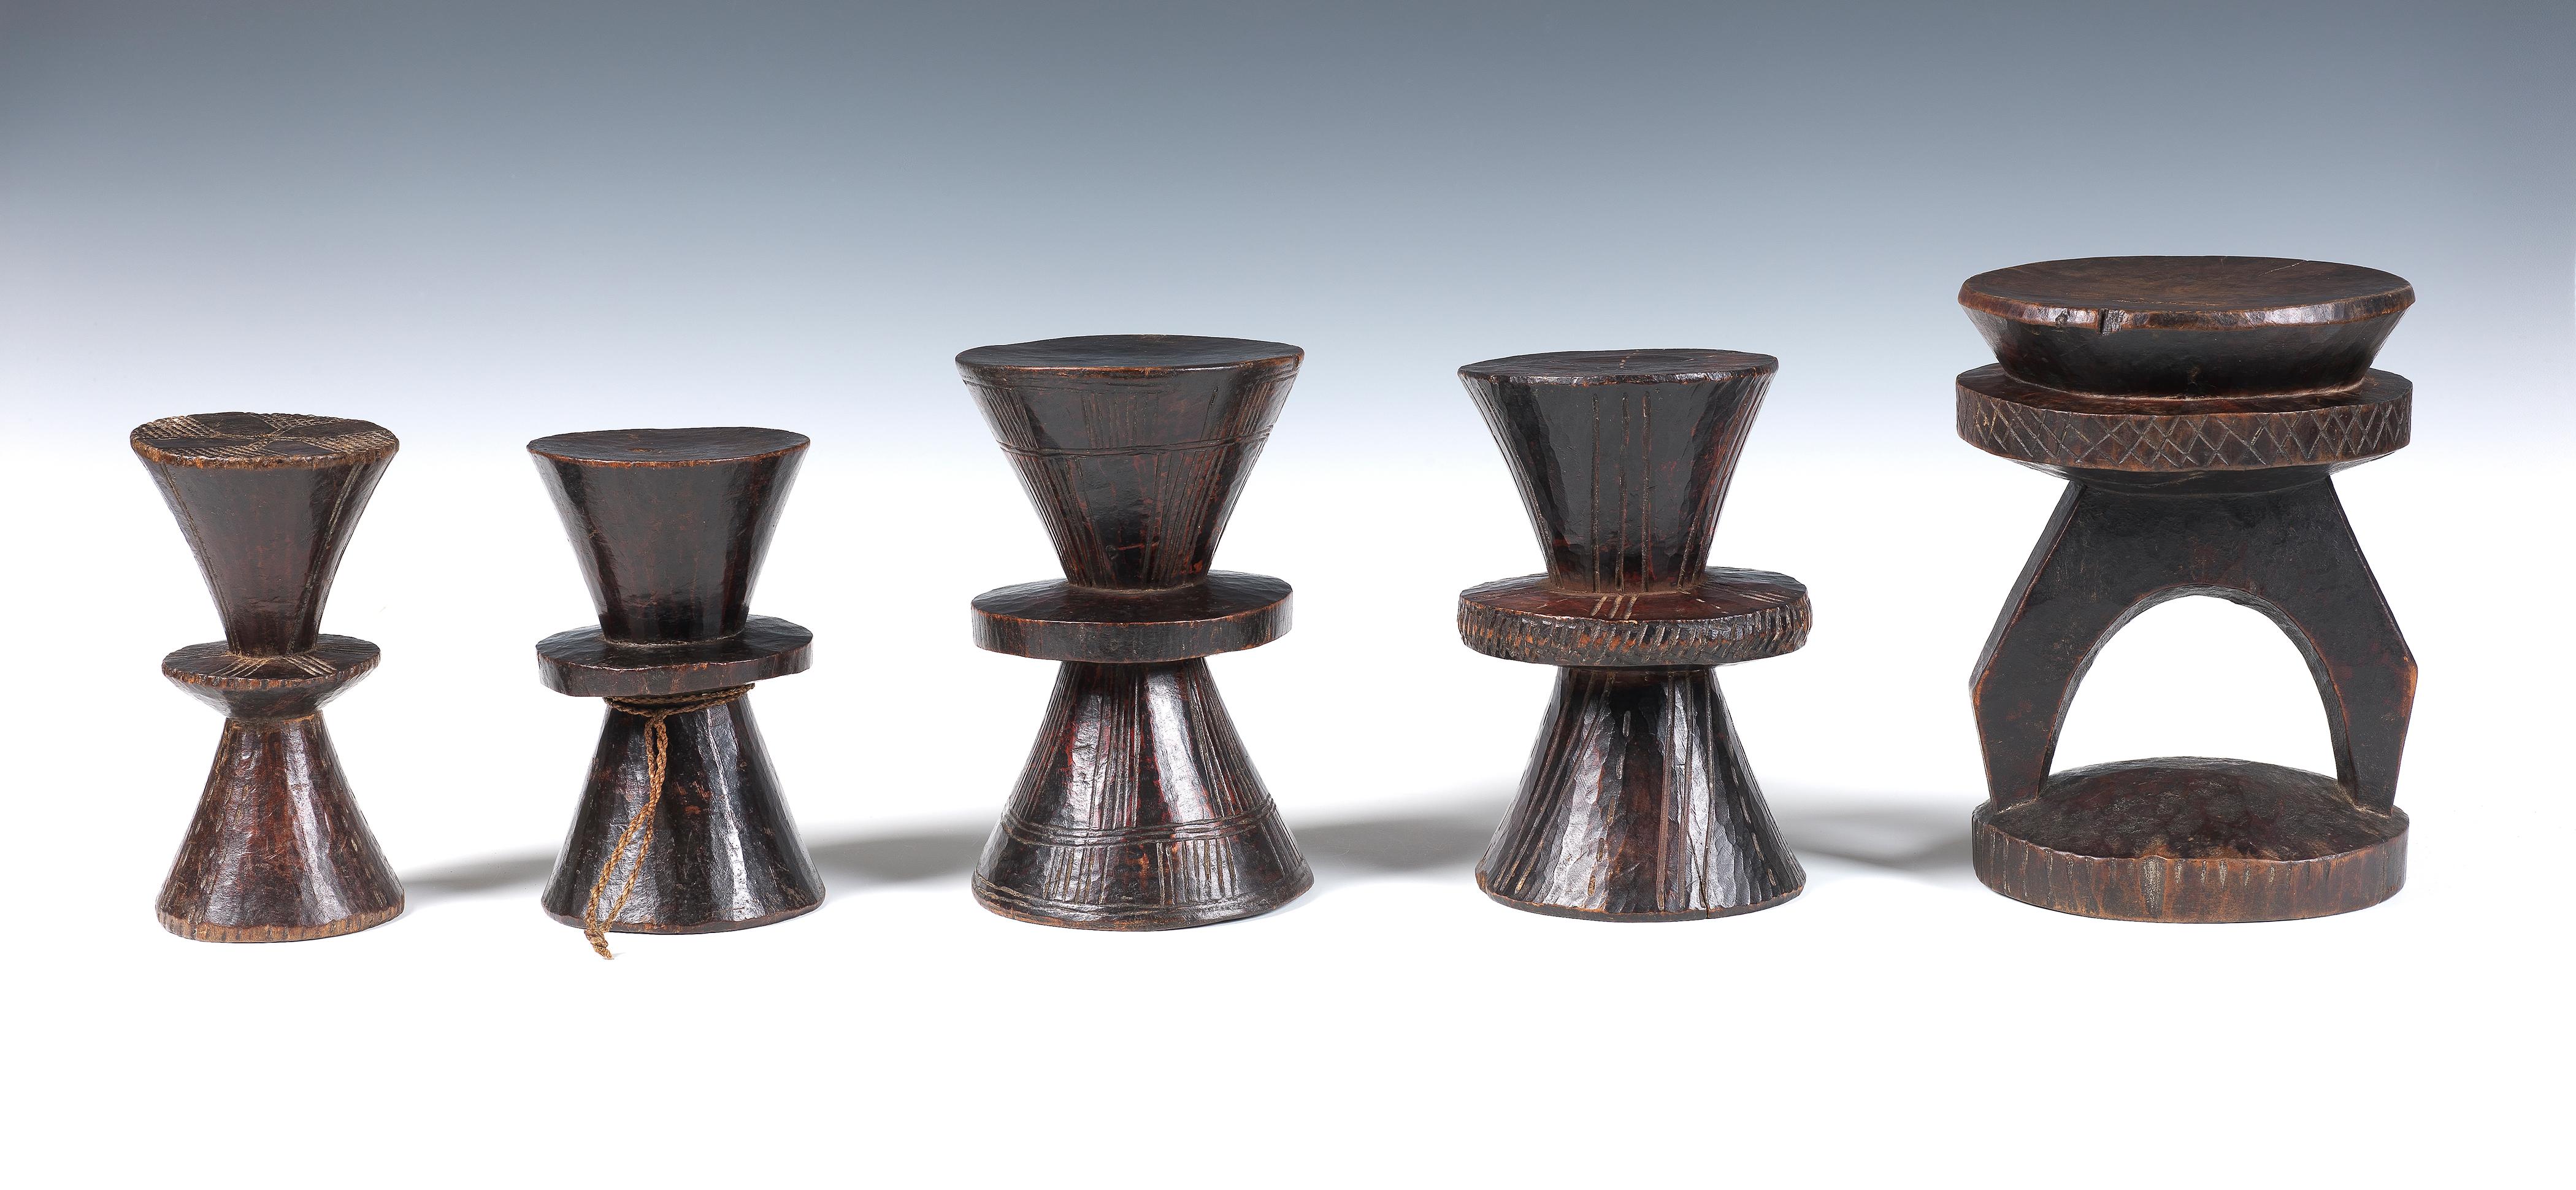 Grouping of Ceremonial coffee stands
Ethiopia
Early 20th century
Wood
Largest: 8